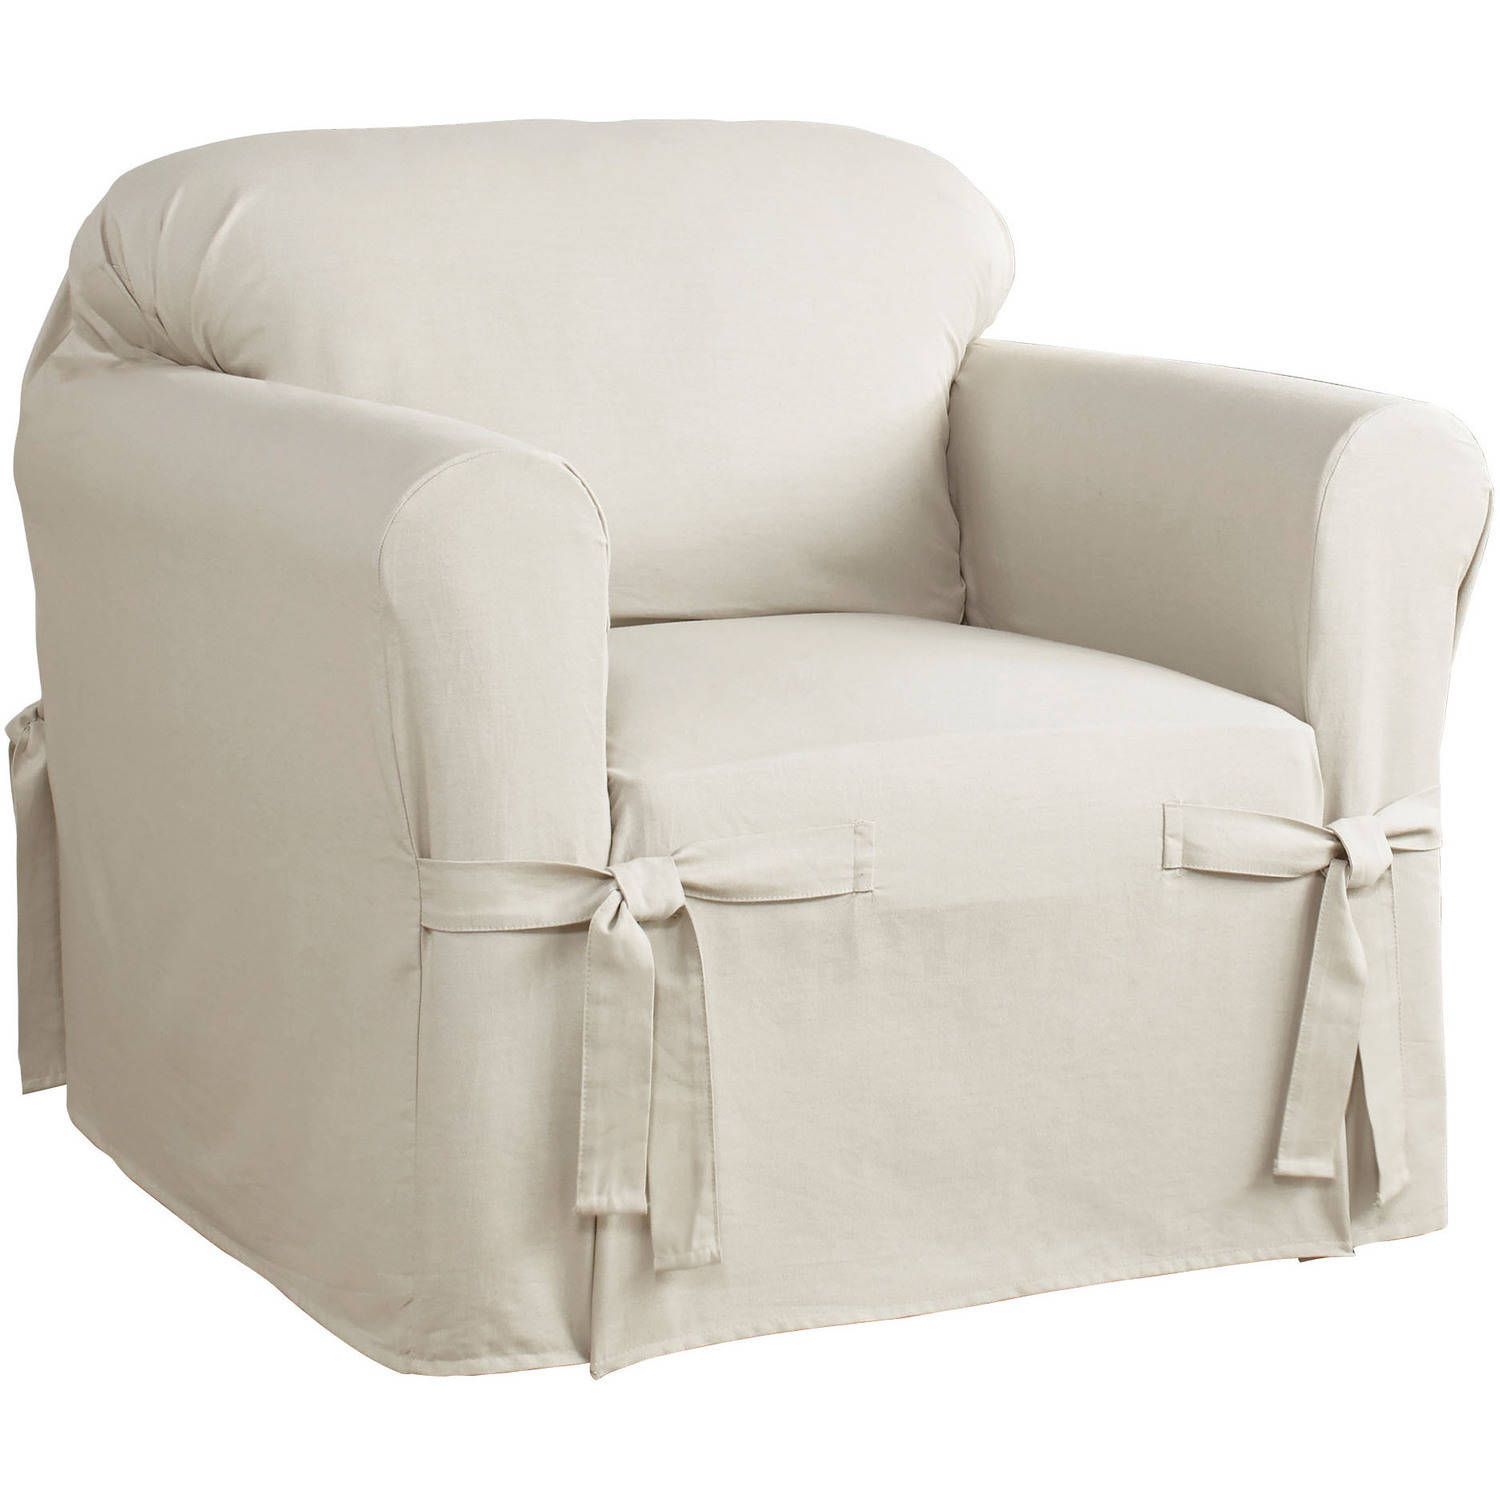 Chair covers Serta Relaxed Fit cotton duck furniture cover, chair 1-piece box cushion NOFZYMY